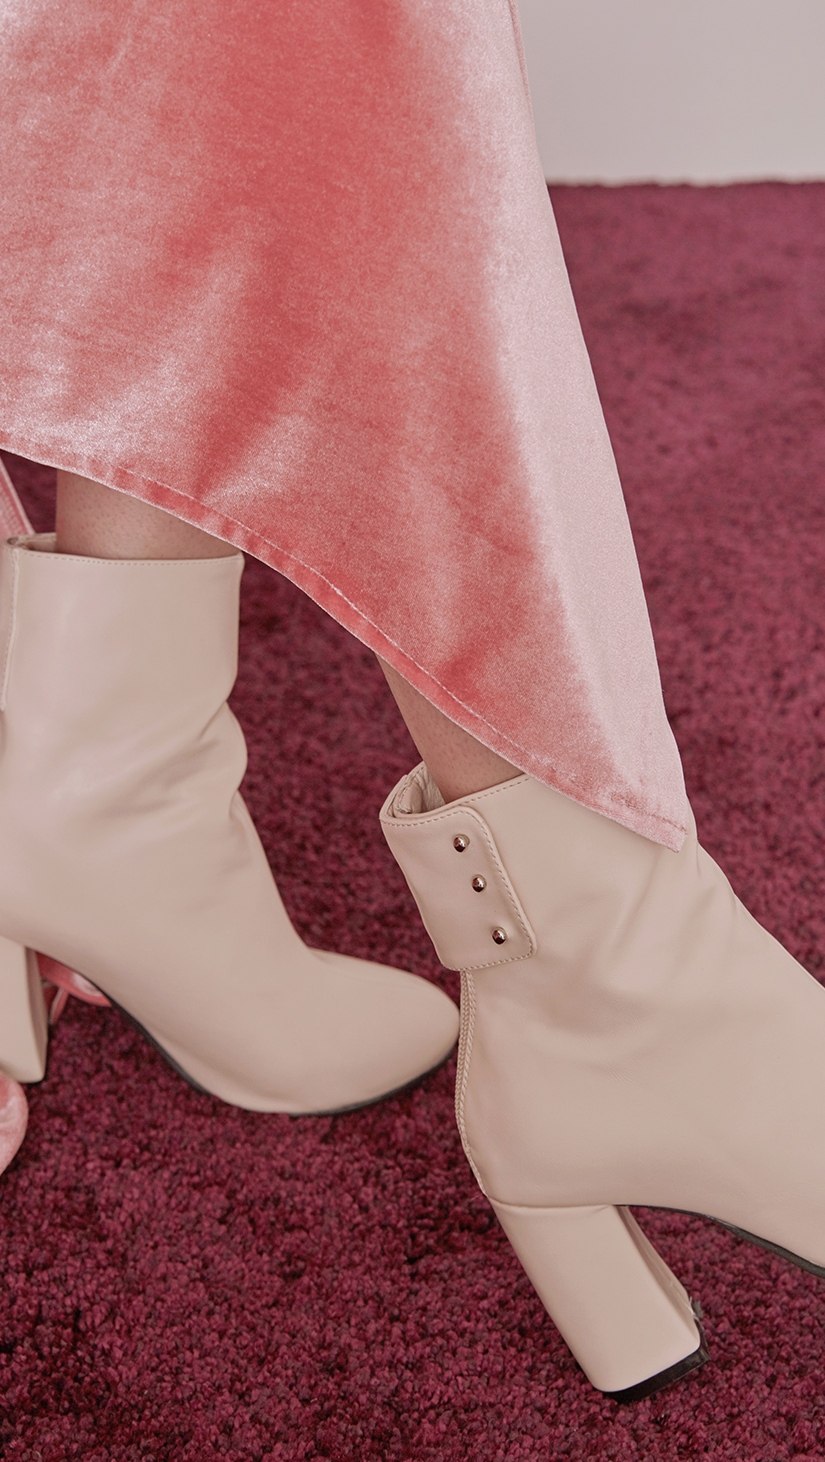 Ayala Midi Boots in Cream Ivory. Soft synthetic leather upper, slouchy design in almond toe and zip opening at back with snap buttons. 